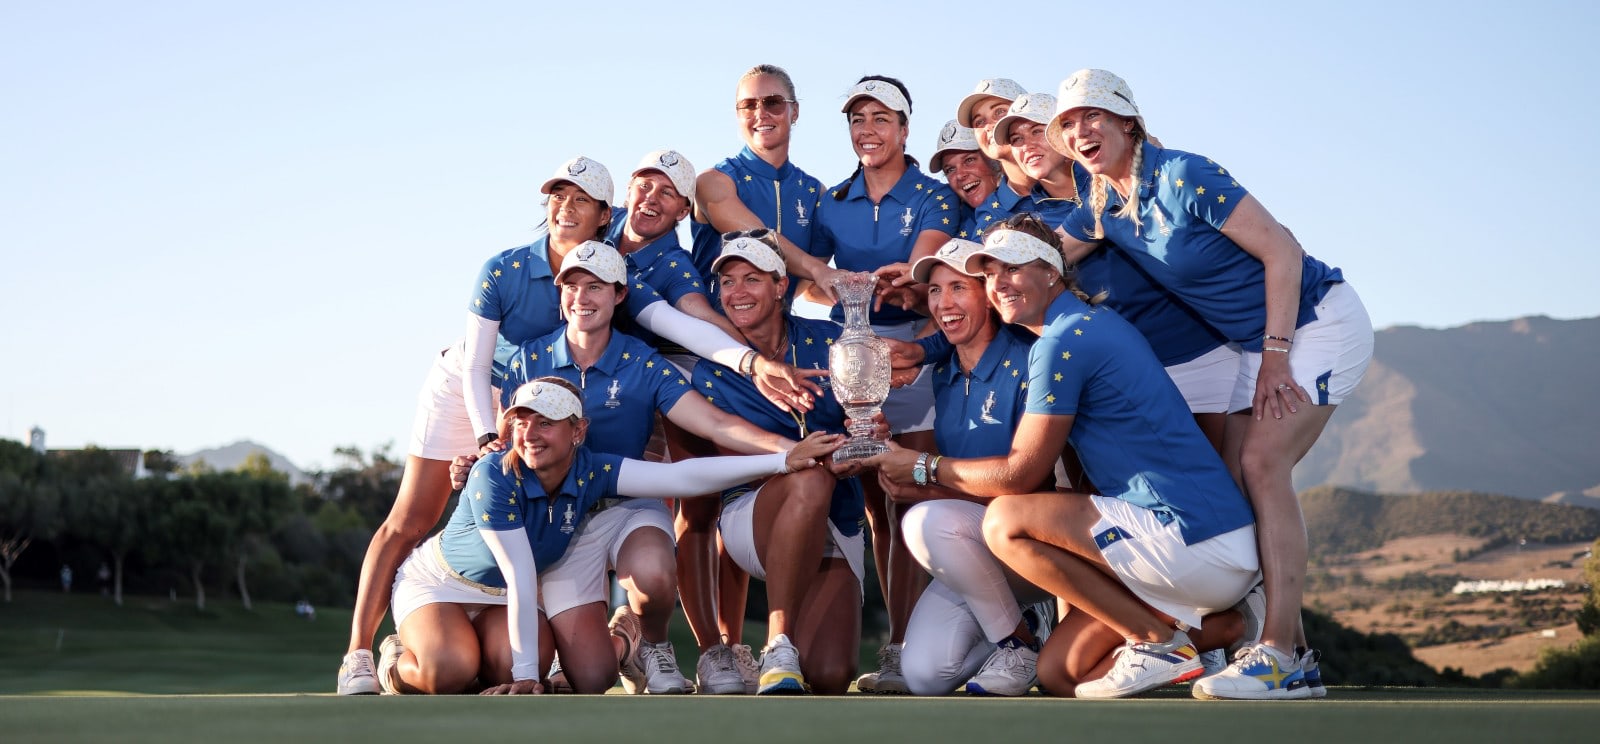 Team Europe with the Solheim Cup trophy